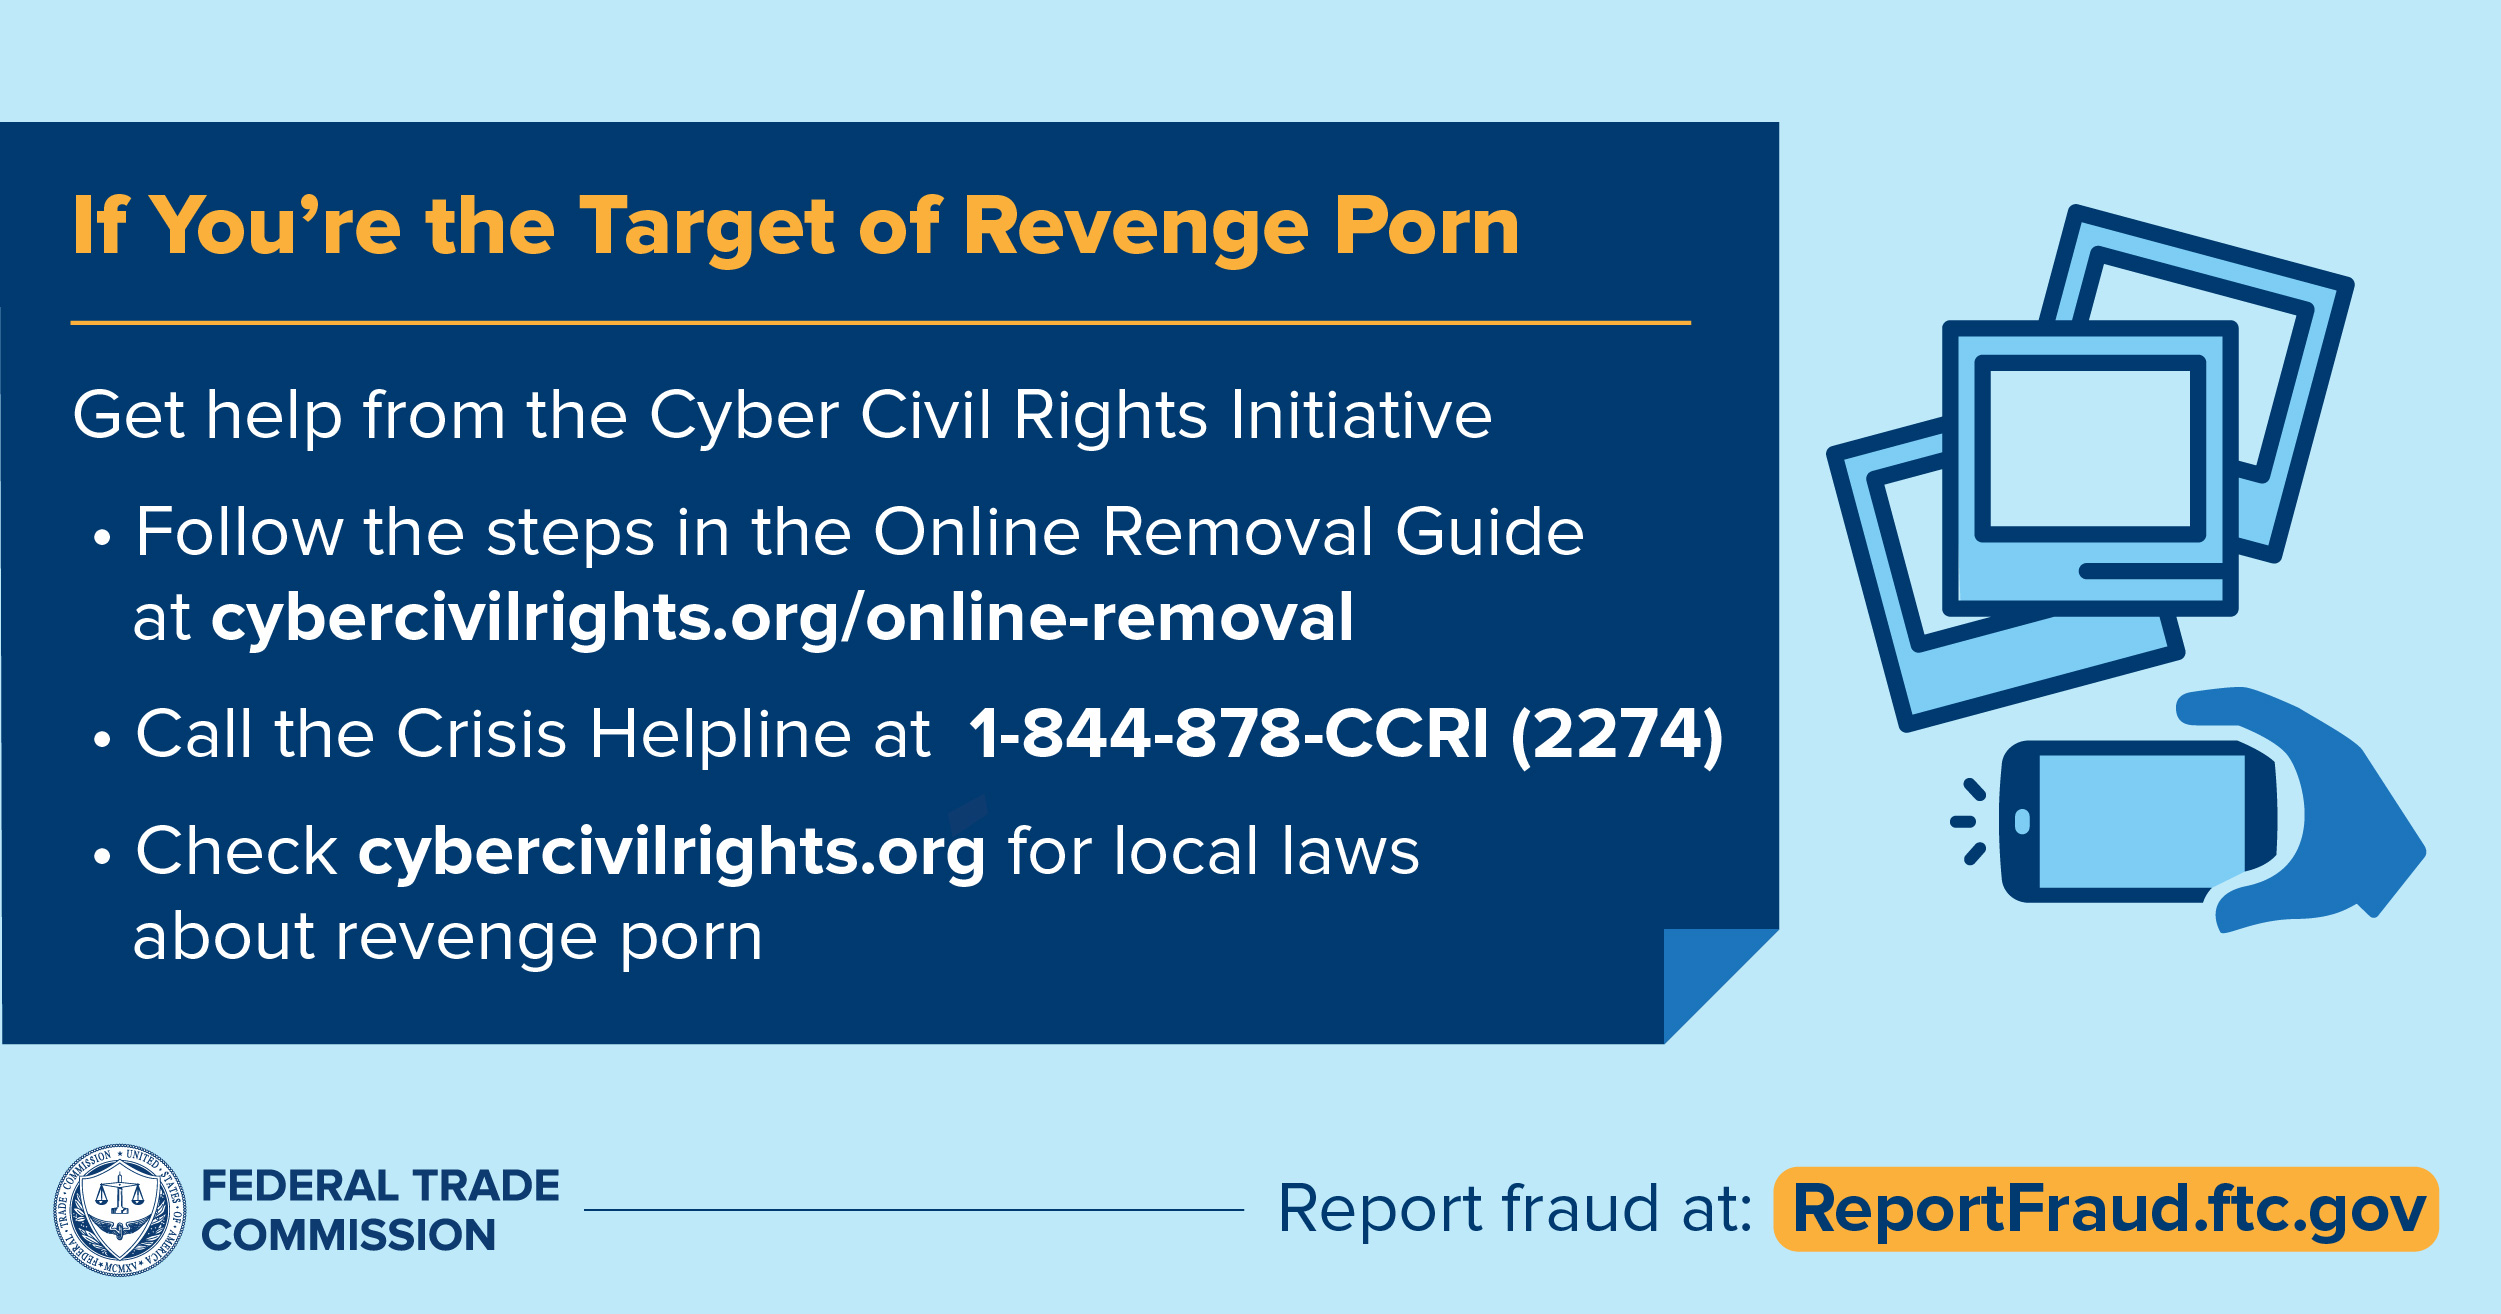 Bing Revenge Porn - What To Do If You're the Target of Revenge Porn | FTC Consumer Information